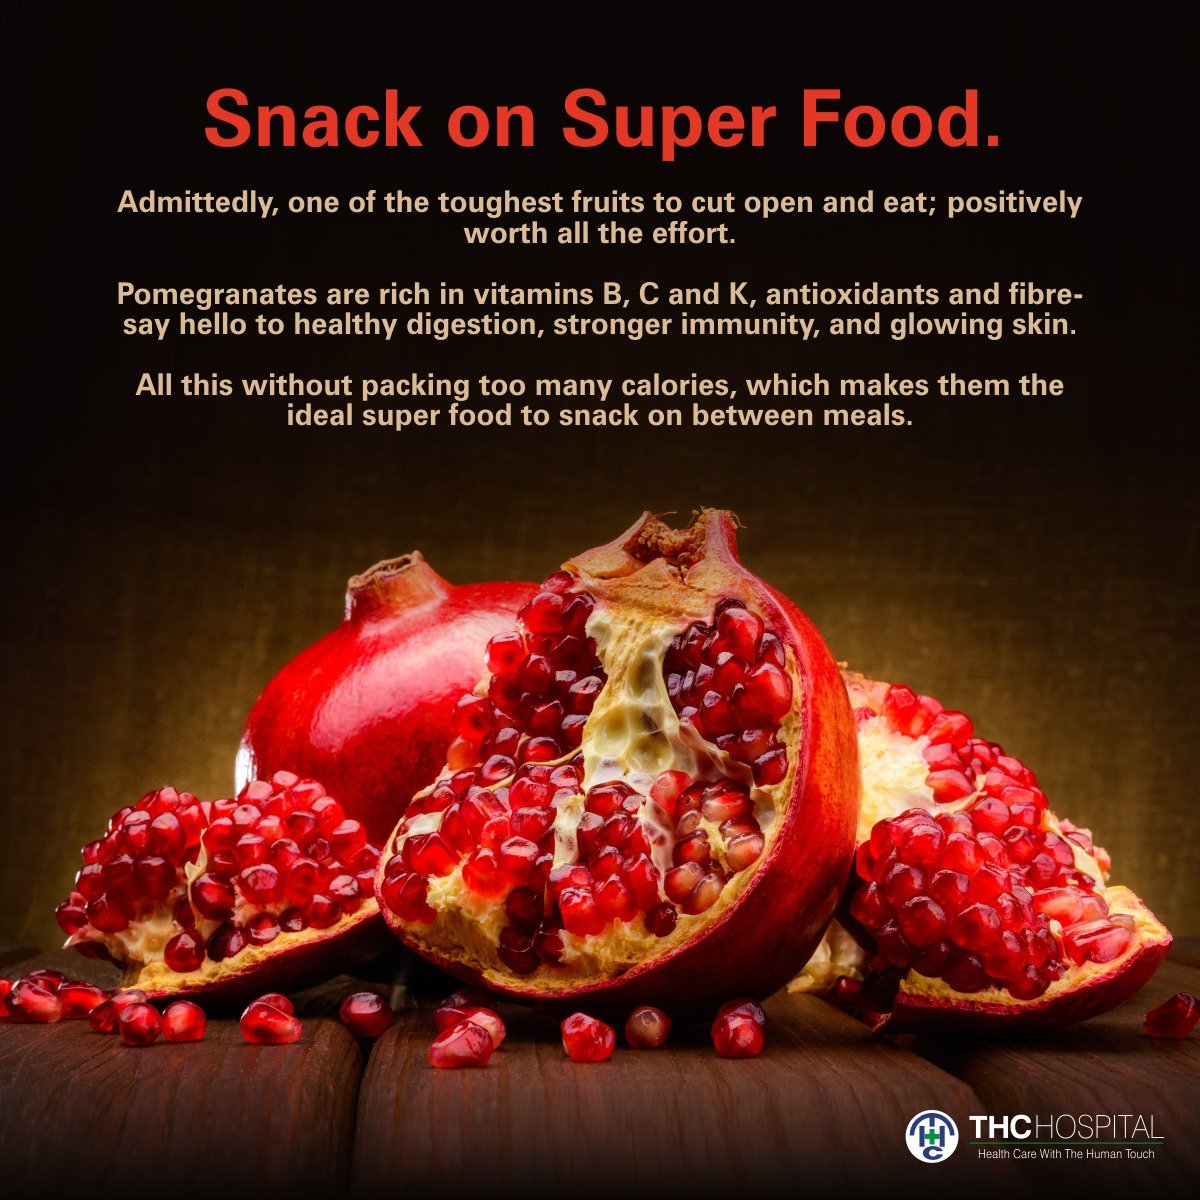 Follow @thchospital for more on #health and #wellbeing. Tag someone who’ll like this!
#THCcares 
thanehealthcare.com
 #Snack #SuperFood #Admittedly #fruits #eat #effort #Pomegranates #rich #vitaminsB  #antioxidants #fibre #healthydigestion #strongerimmunity #glowingskin